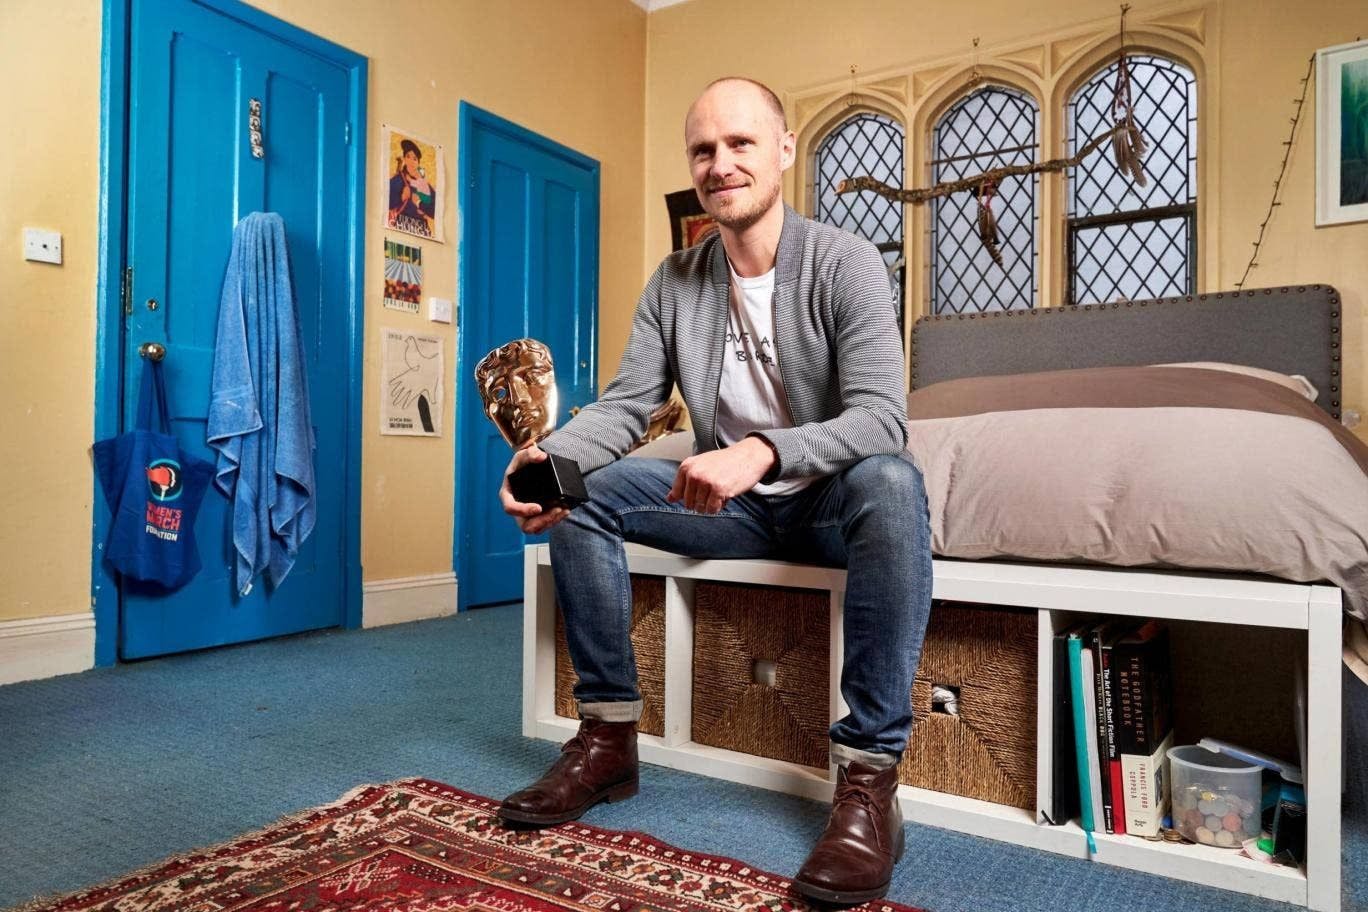 Property guardians: Bafta-winning documentary maker says cheaper rent helps him live a creative life in London